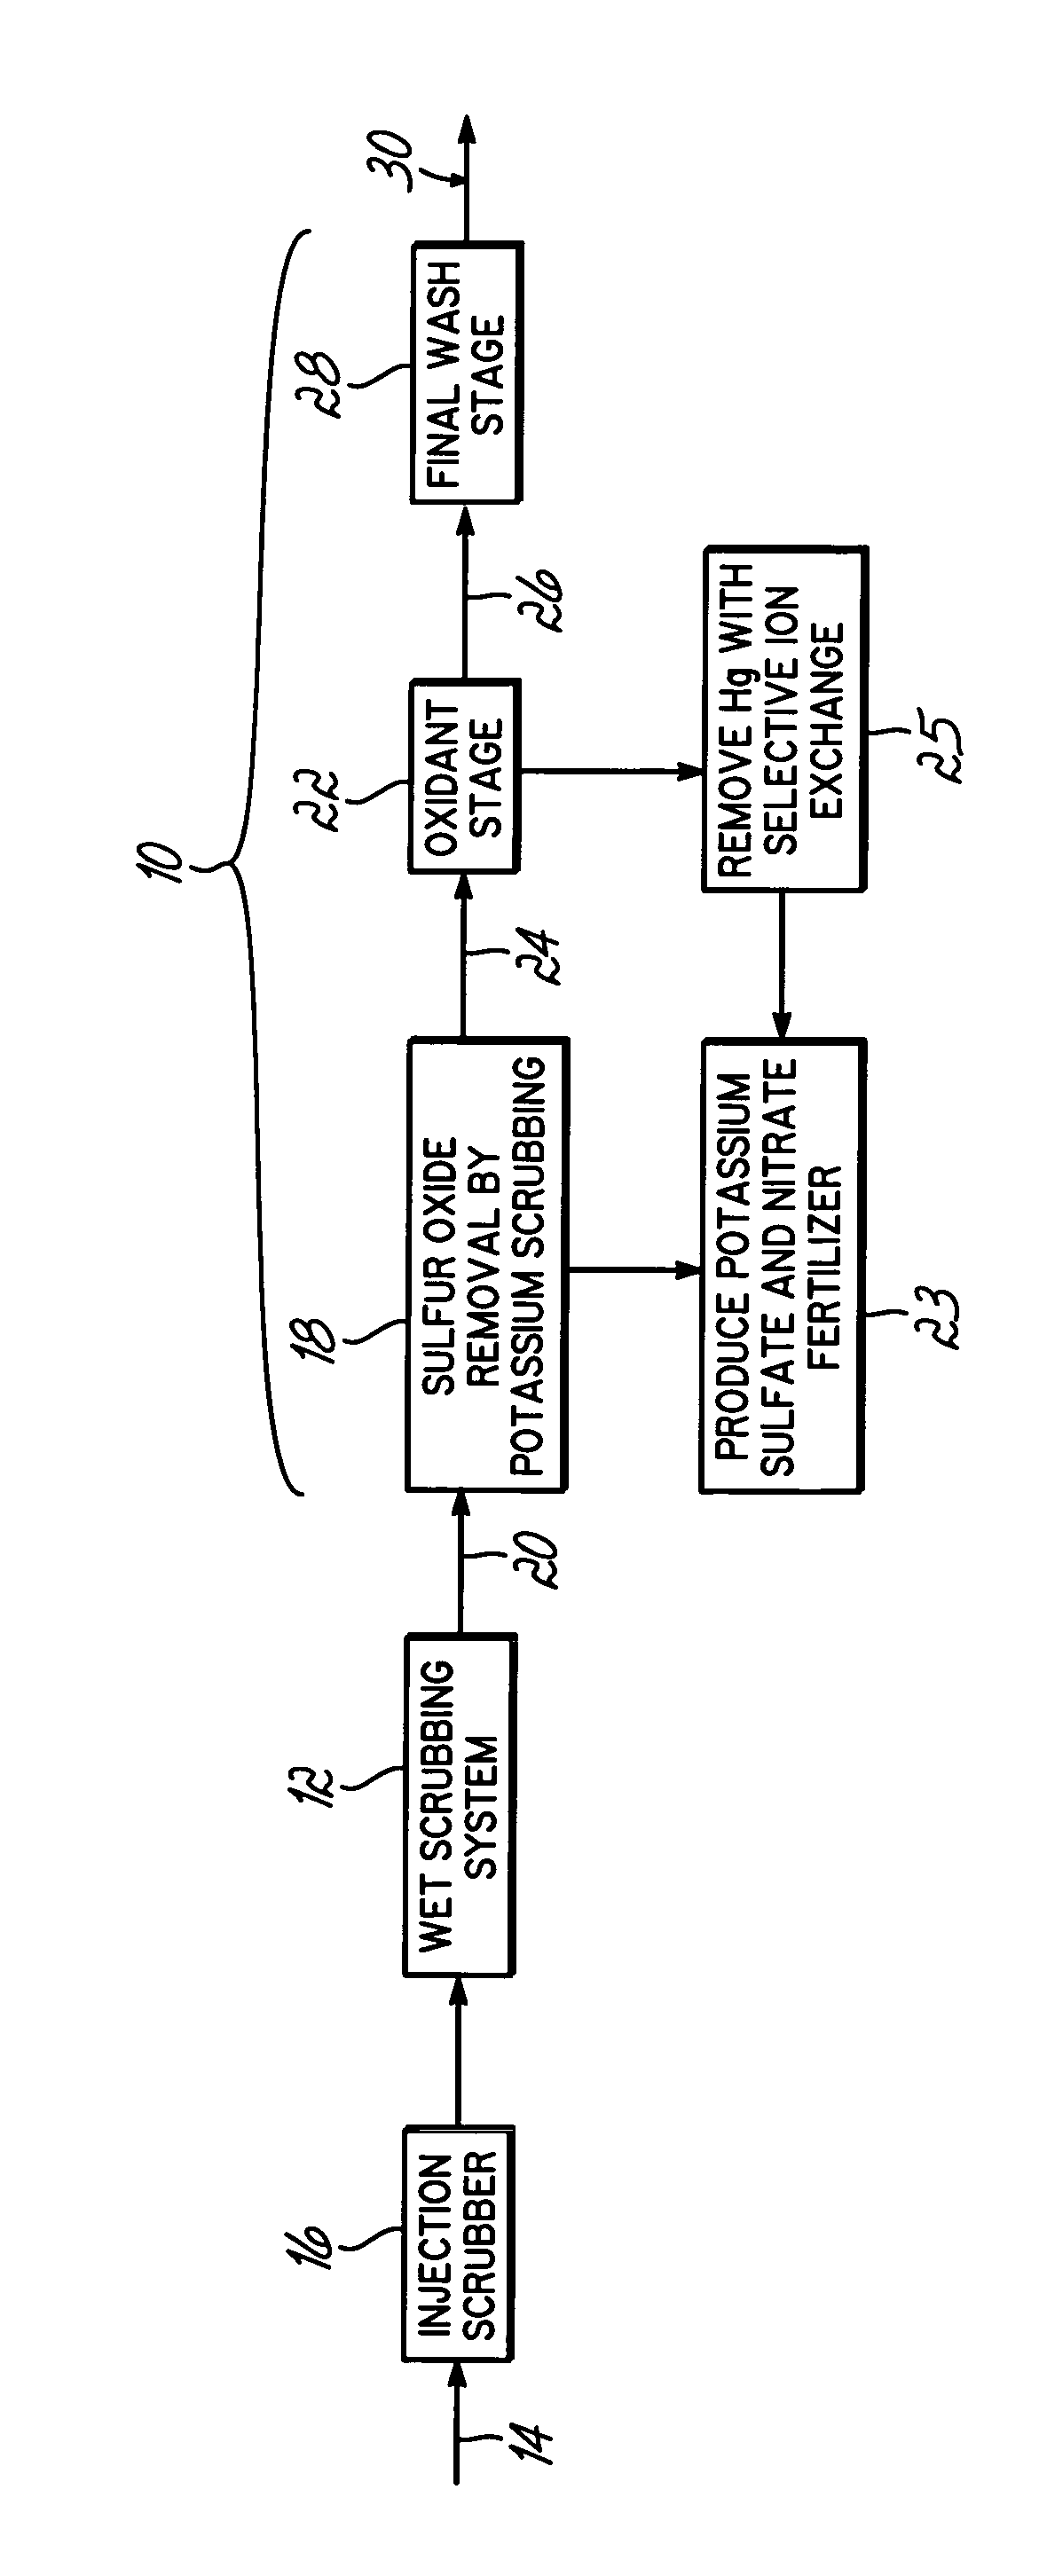 Method for removing sulfur dioxide, mercury, and nitrogen oxides from a gas stream